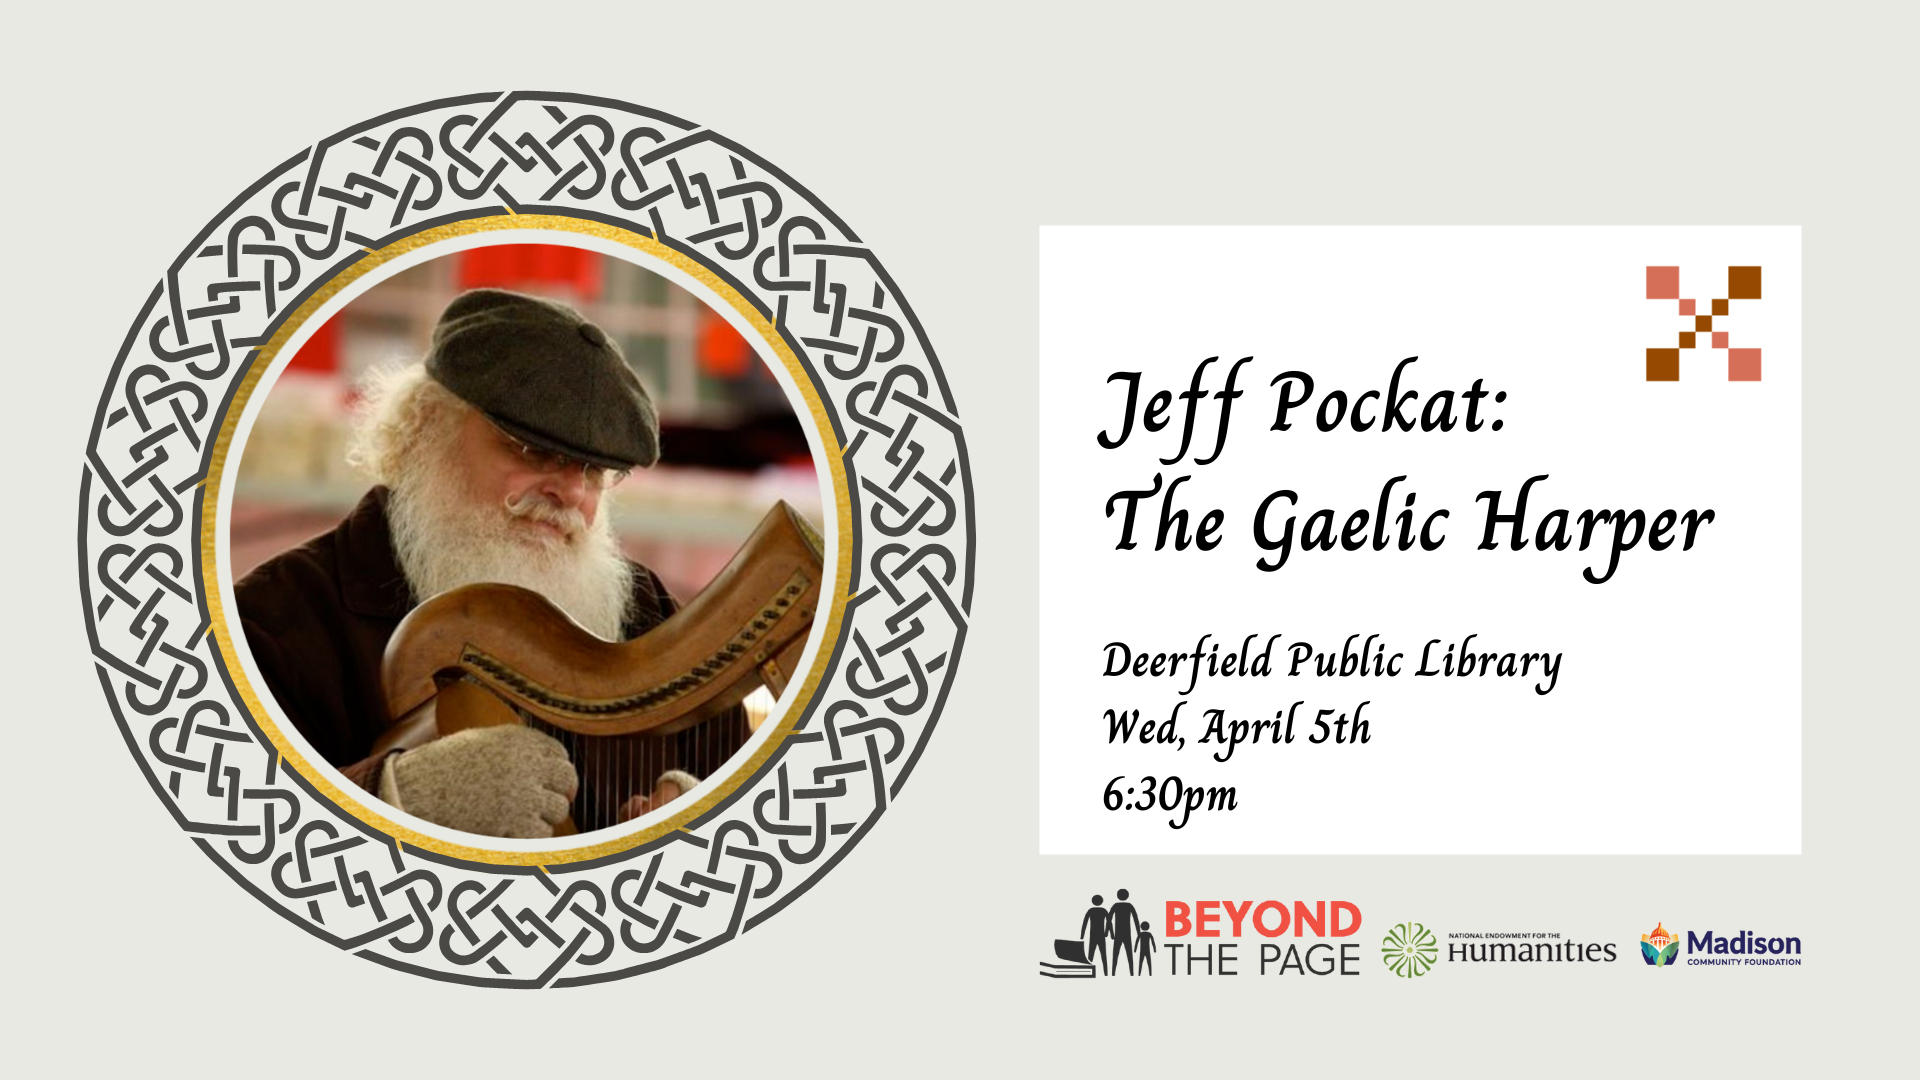 image of jeff pockat (older white man with long, full white beard) wearing a cap and playing a wooden harp. Deerfield Public Library. Wed, April 5th. 6:30pm.